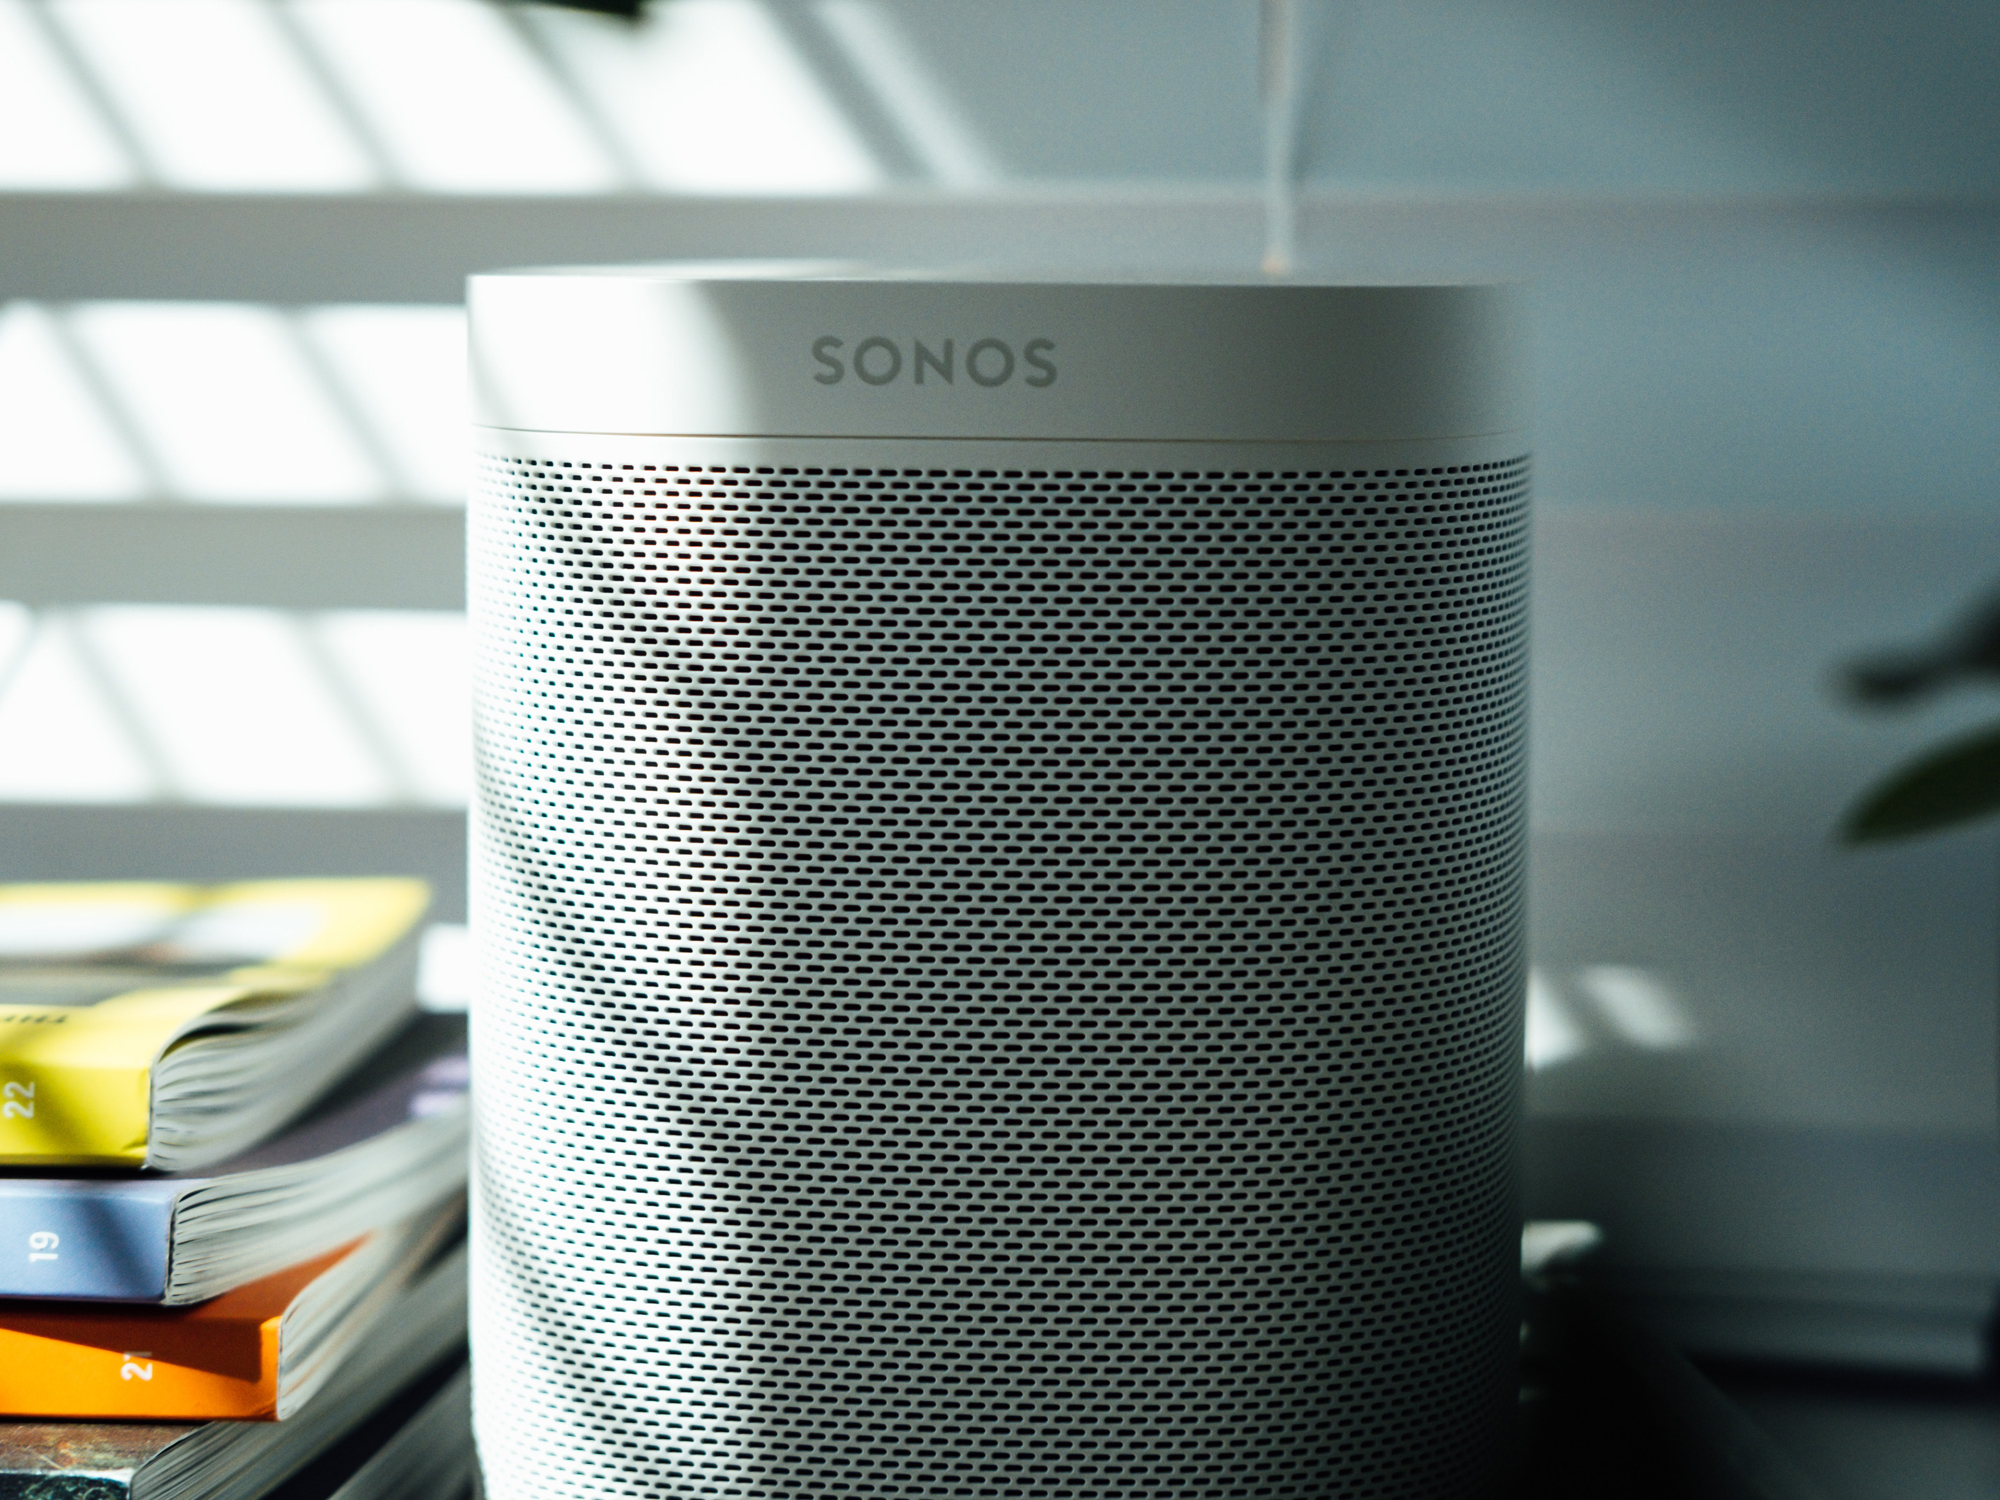 How to control Sonos speaker with only your Science